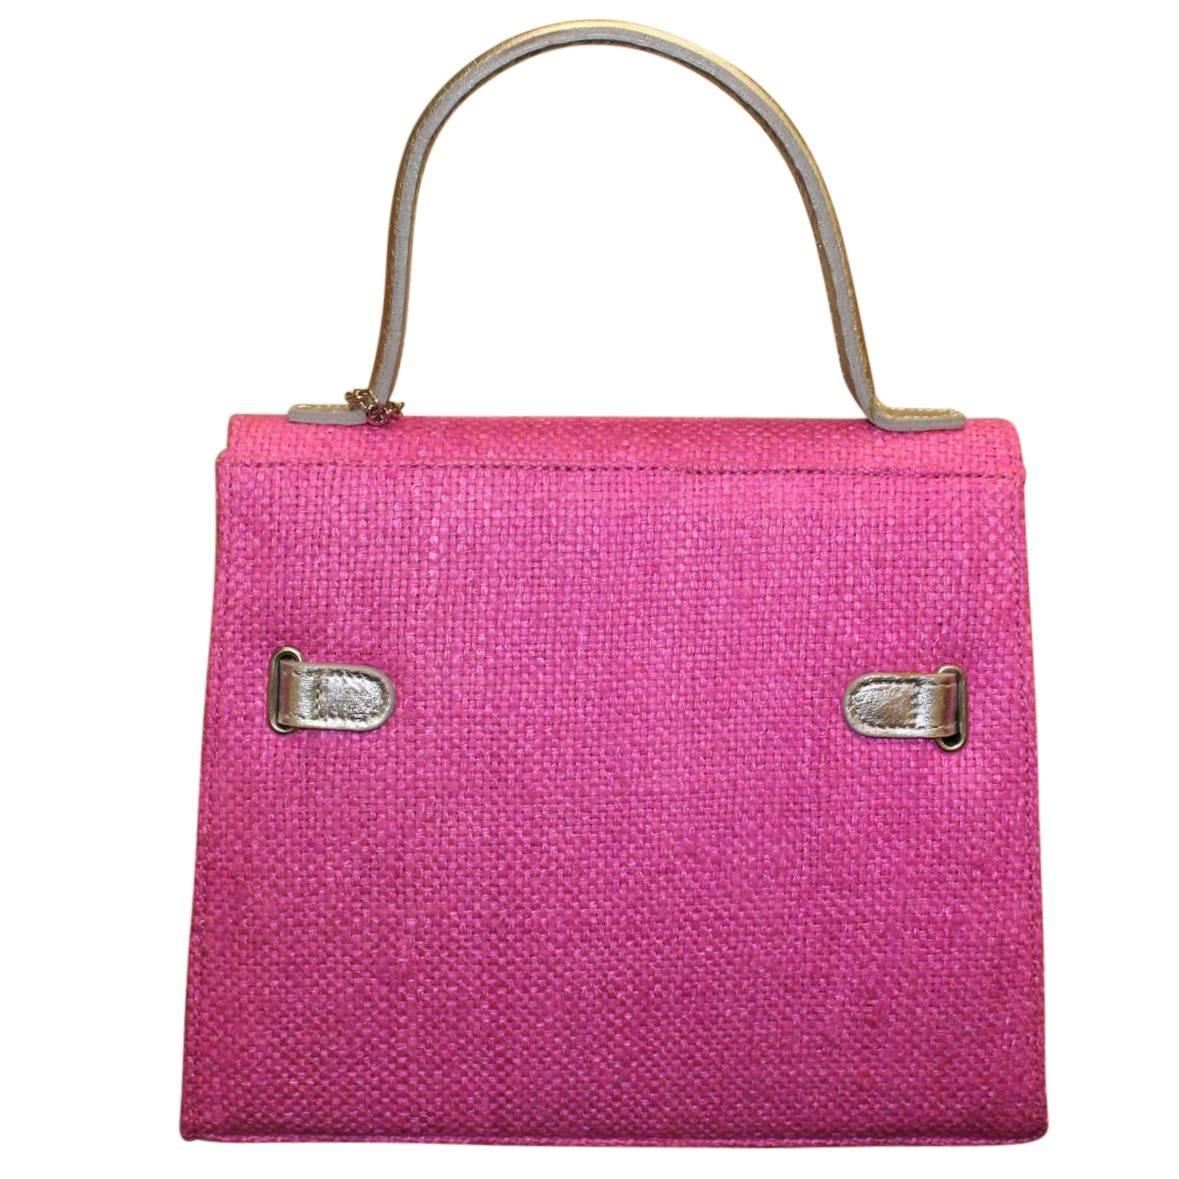 Fantastic jewel bag by Carlo Zini Milano
One of world's best costume jeweller
Unique piece !
Fuchsia textile
Wonderful metal, crystals and swarovsky applications
Floral theme
Silver leather handle
Internal zip pocket
Can be carried crossbody too
Cm